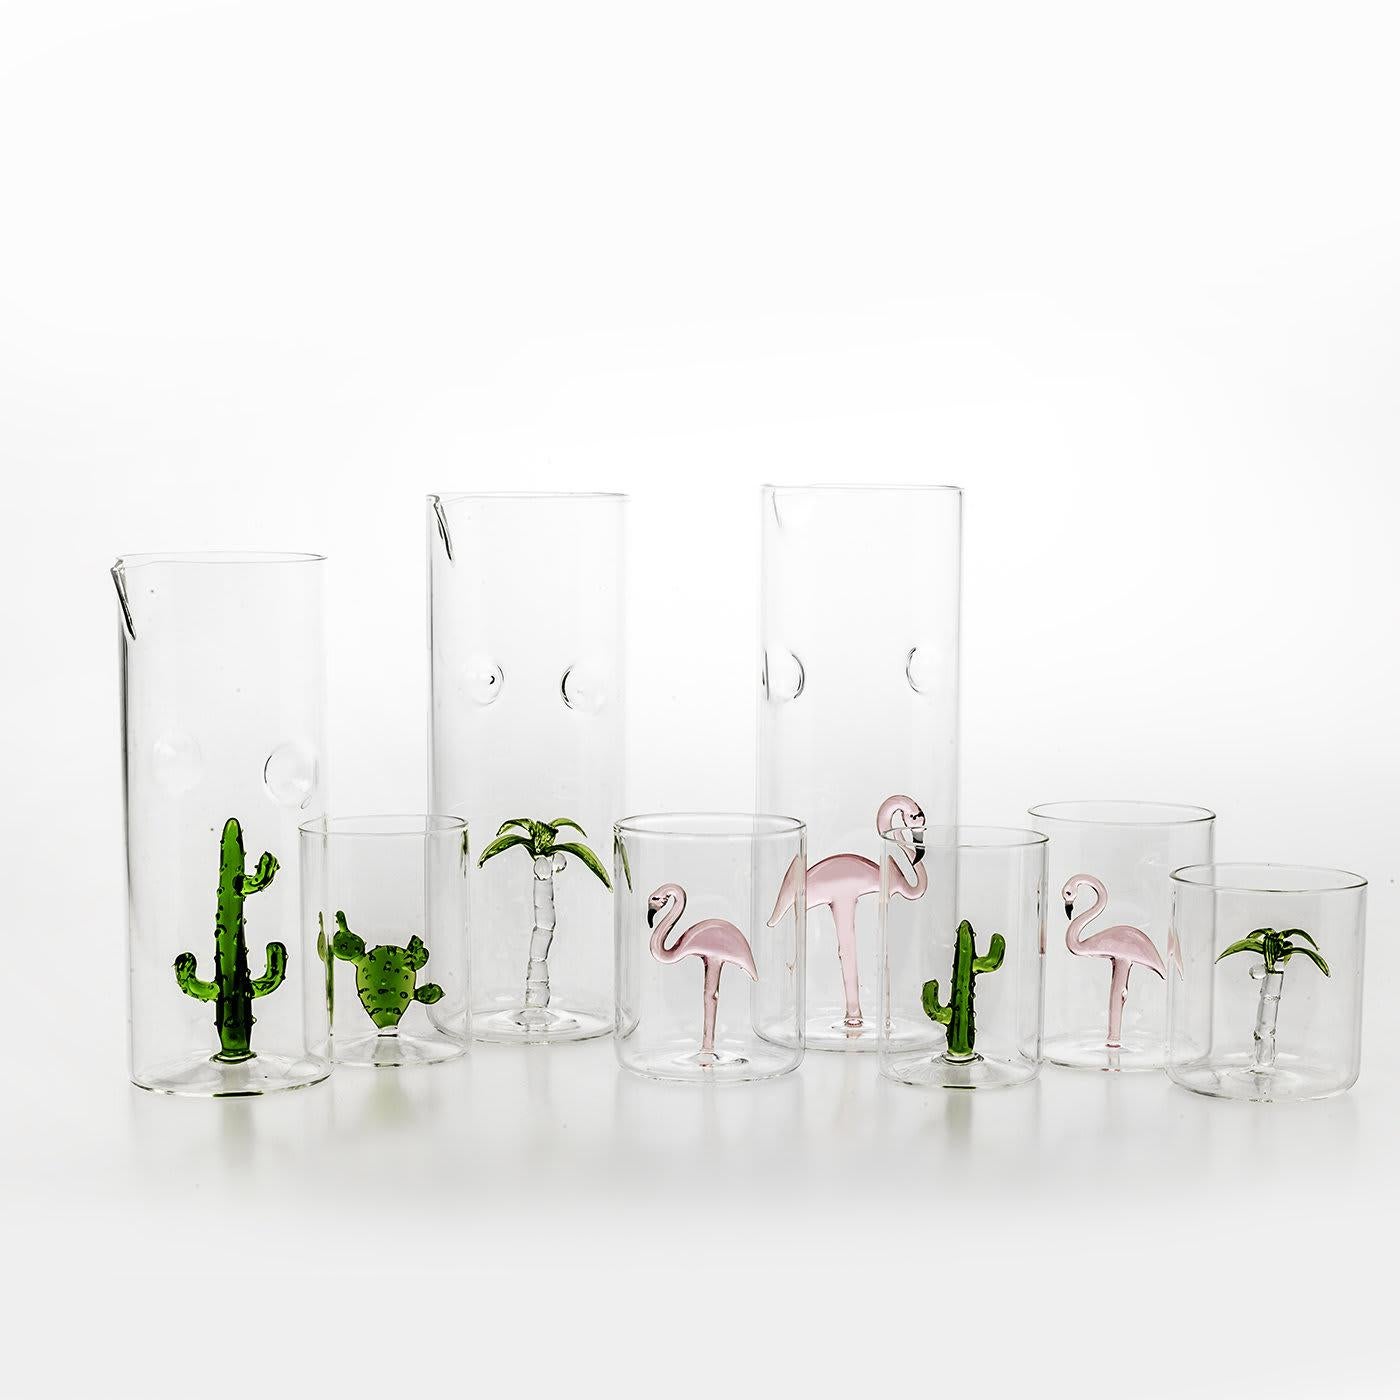 This set of one pitcher and four glasses is adorned with a handmade sculpture of a palm tree hand-painted in green. Each object is unique and will be an eye-catching addition on any occasion, particularly if entertaining outdoors in the summer. All